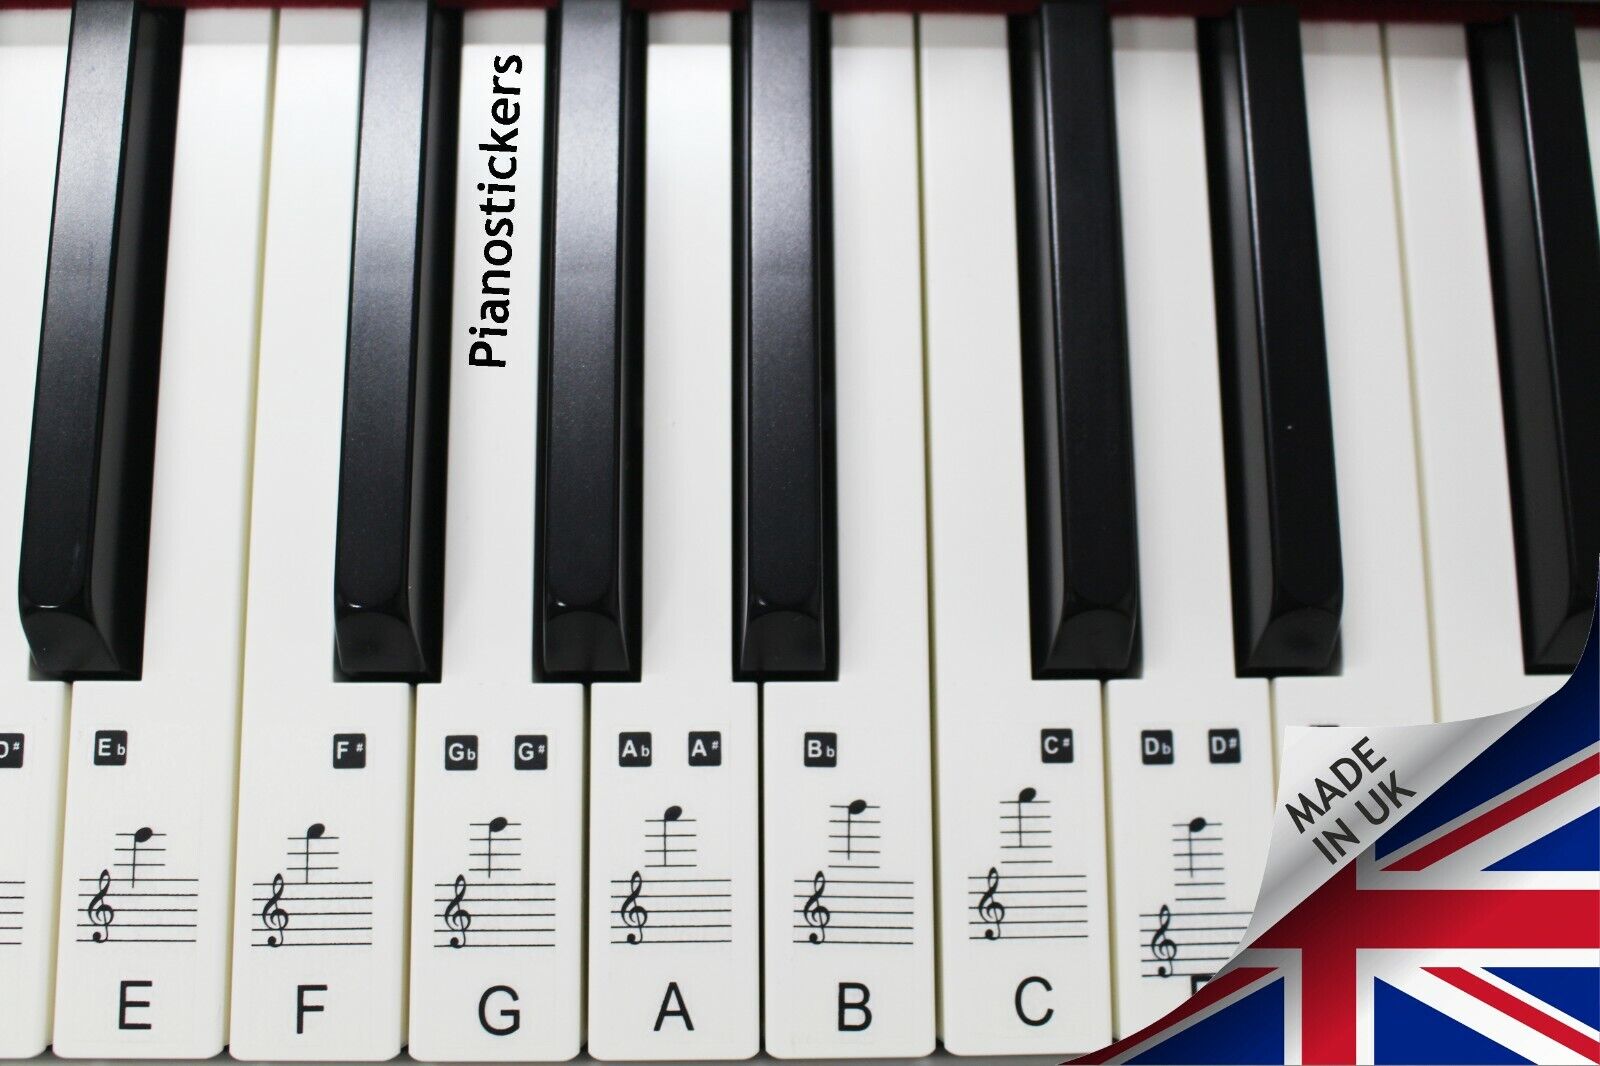 Music Keyboard or Piano Stickers 88 KEY SET  learn to play faster clear stickers